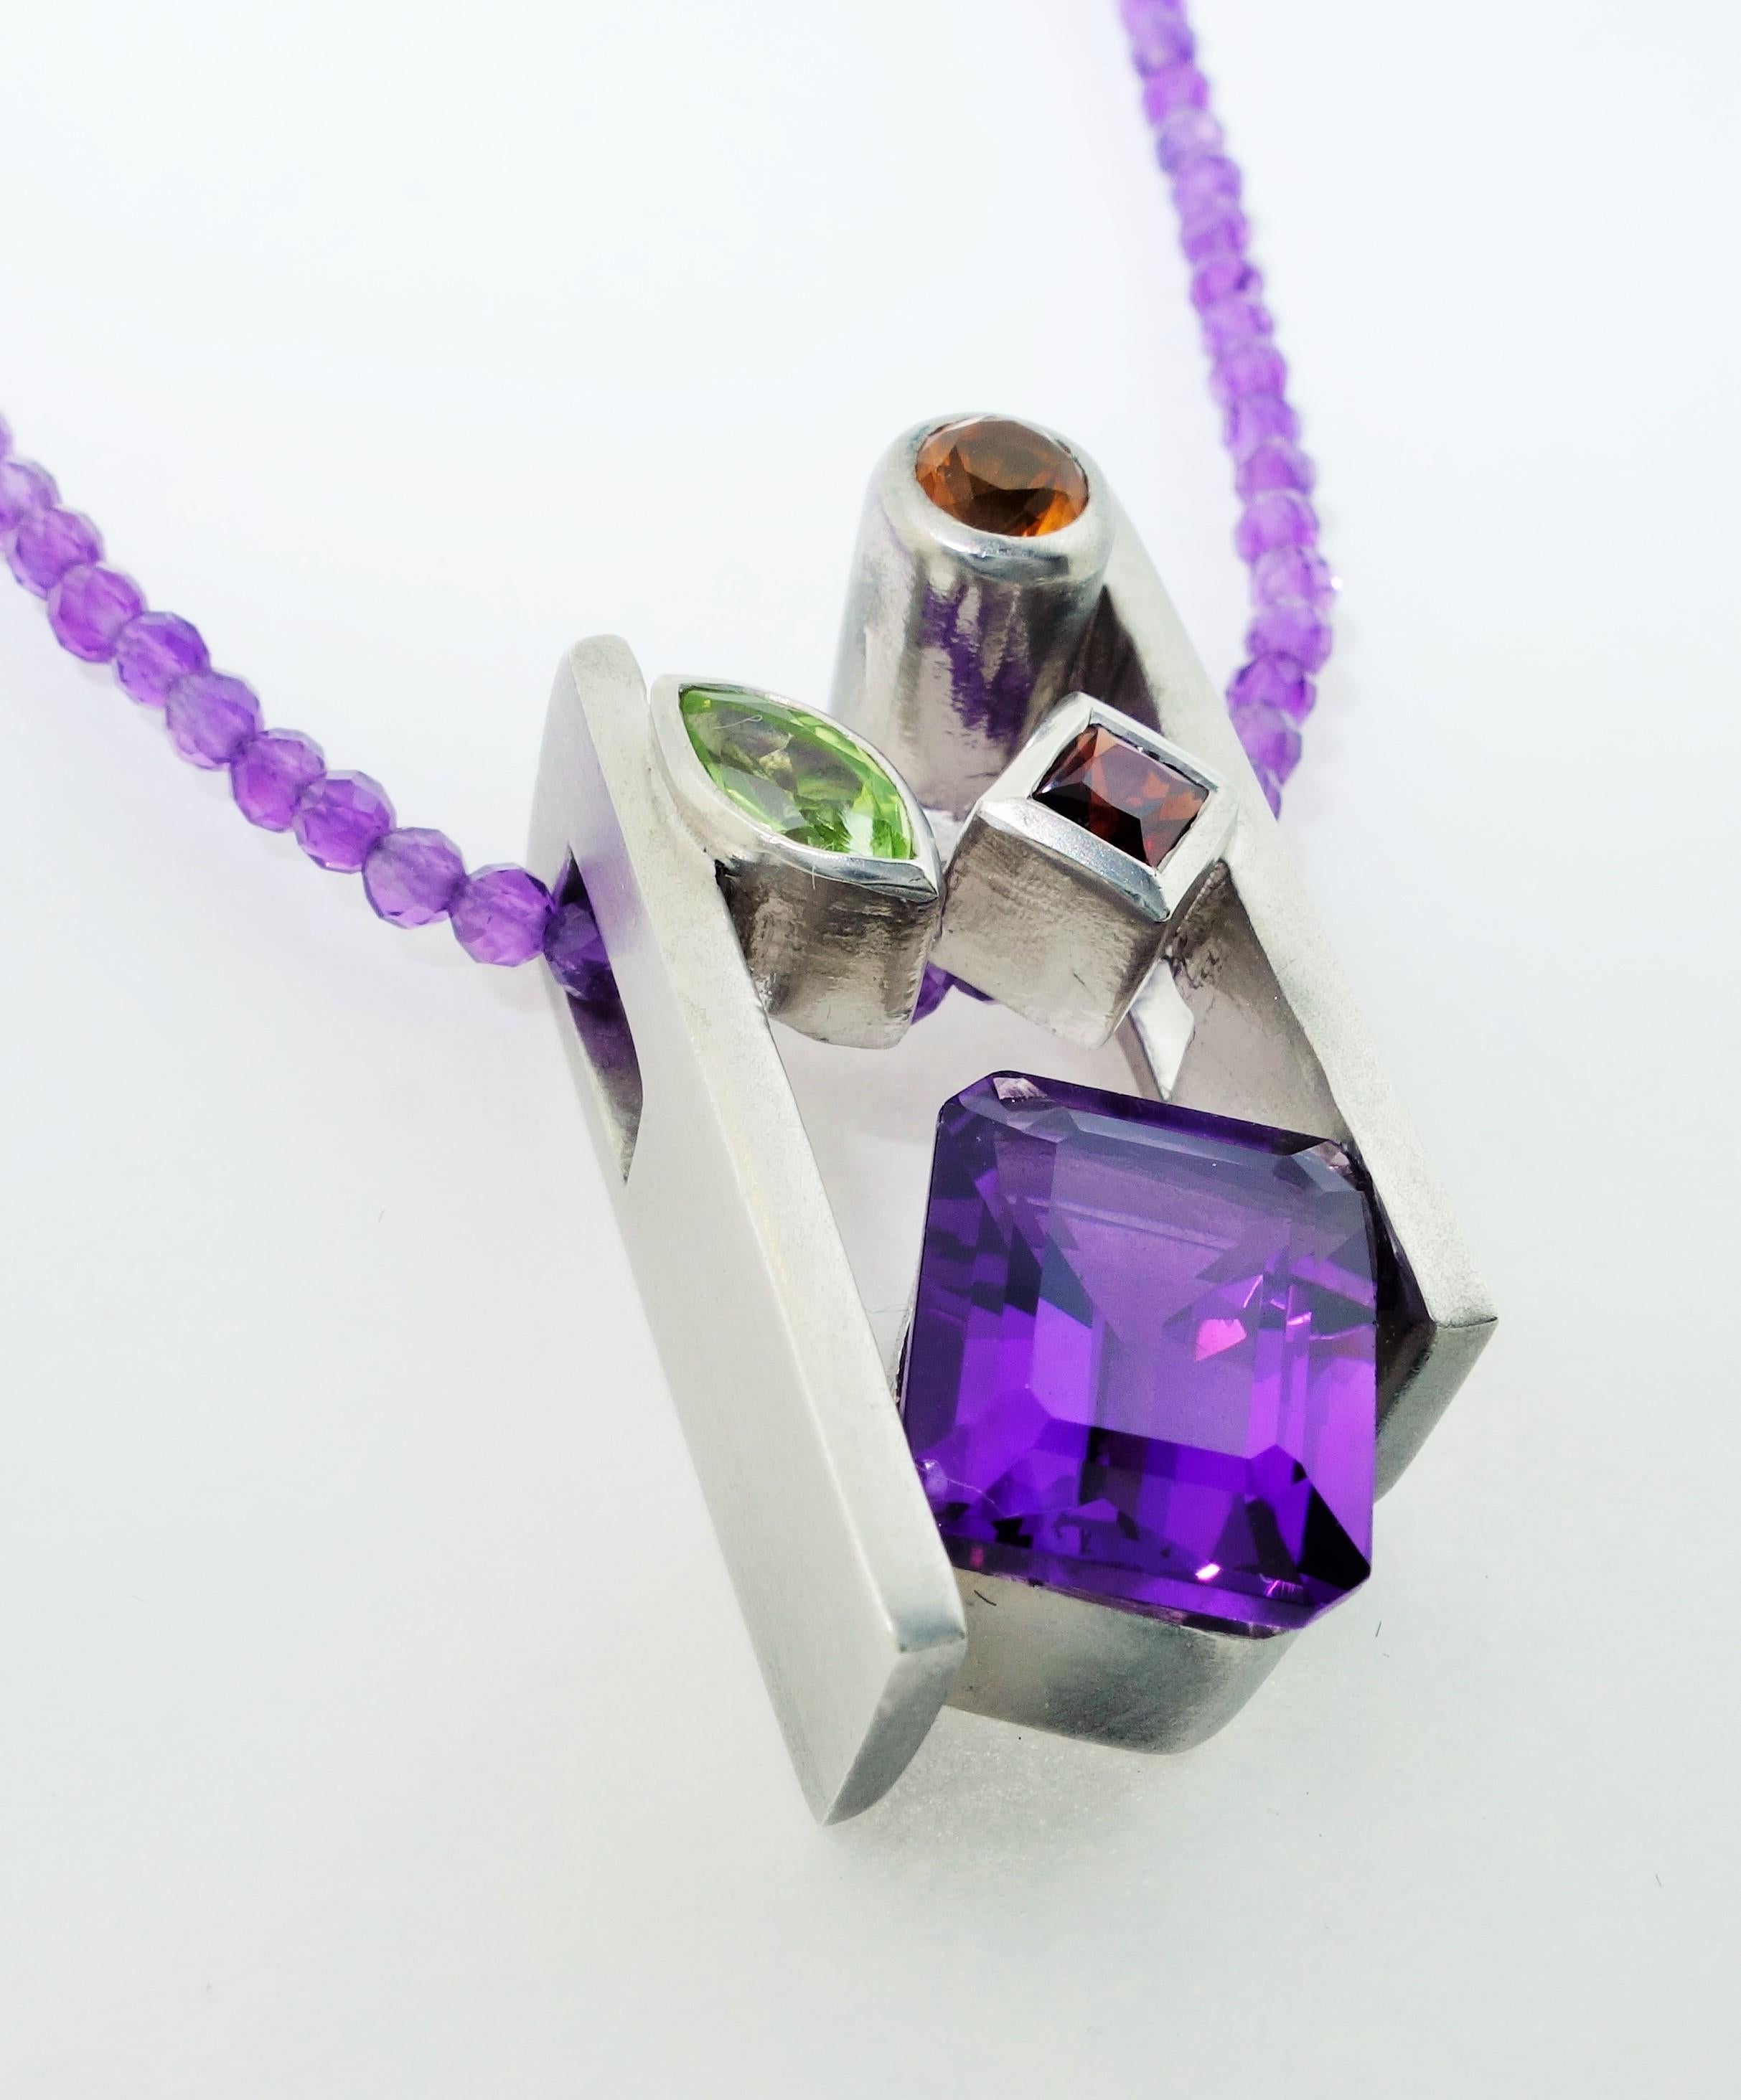 Beautiful and Finely detailed Amethyst, Citrine, Peridot and Garnet Pendant Hand set in Sterling Silver and suspended from a multi colored Amethyst Necklace; approx. total weight of Gemstones: 4.73 Carat. The pendant is Hand crafted in Rhodium